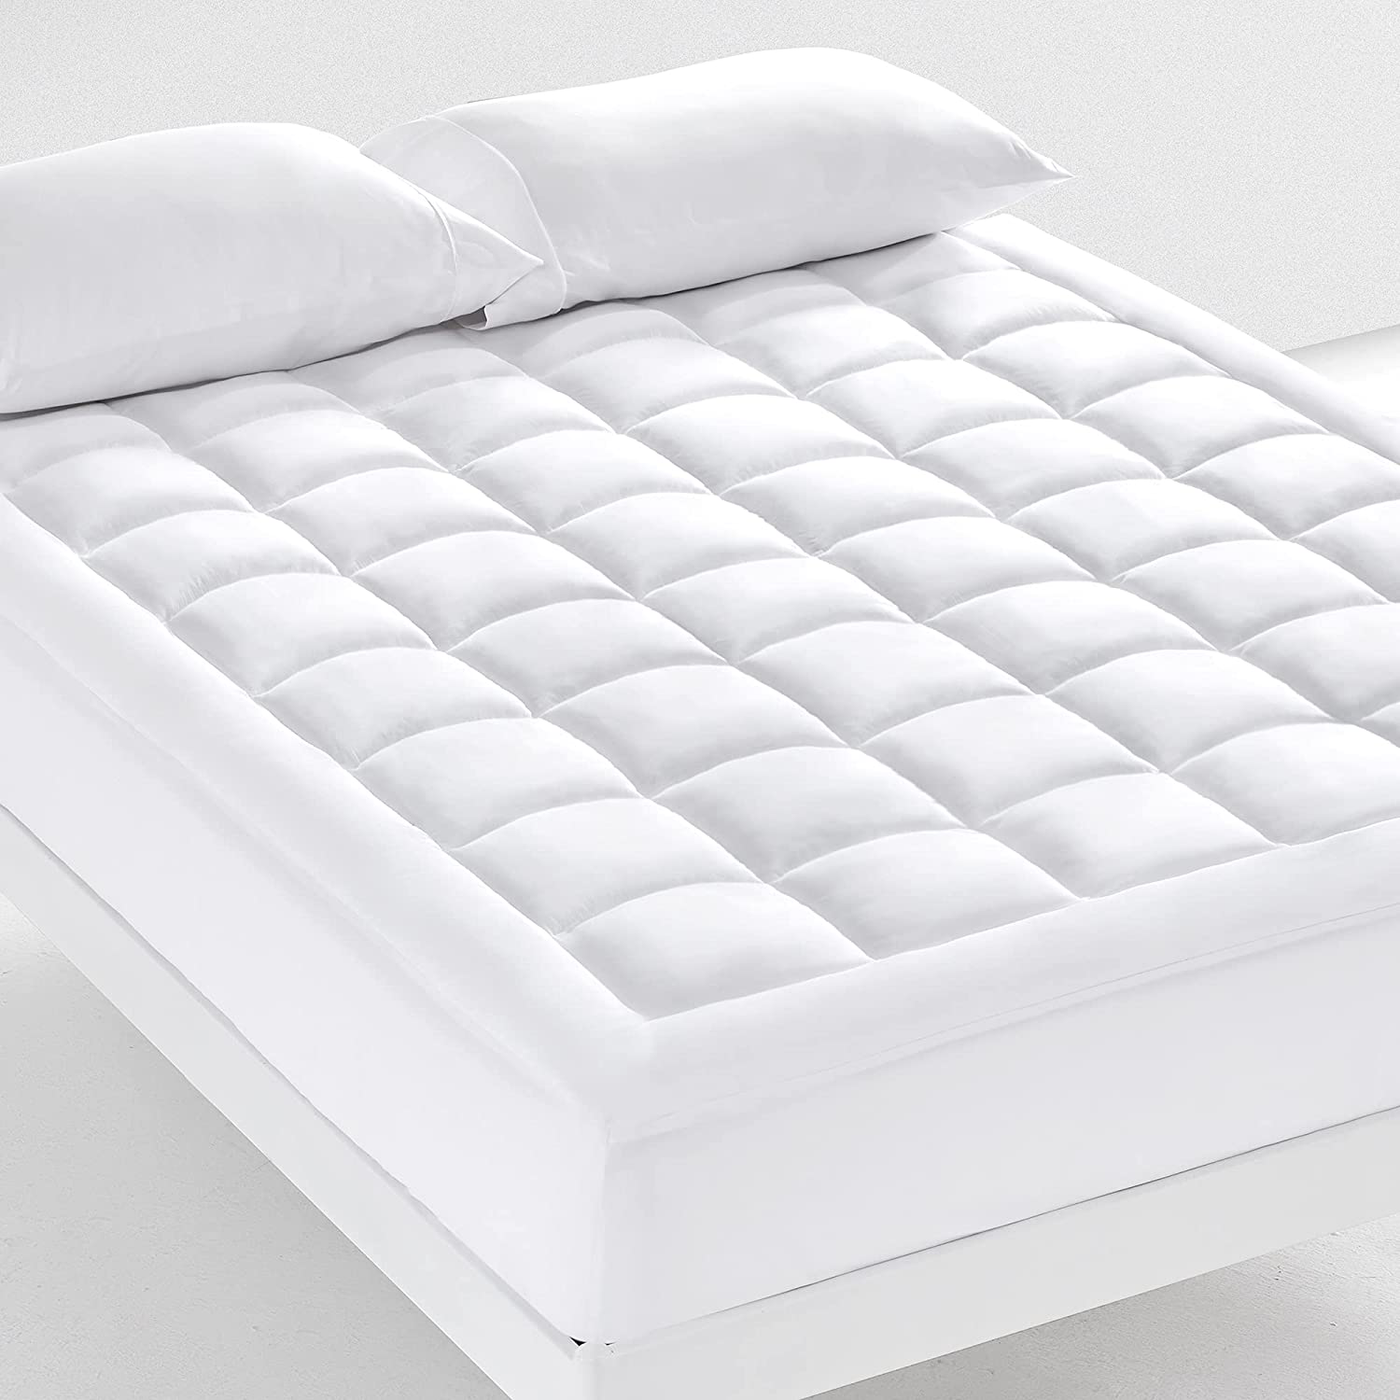 SONIVE Quilted Mattress Pad Soft Fluffy Pillow Top Mattress Cover Down Alternative Fill Topper Streches up to 21 Inches Deep Pocket (White, Twin XL)